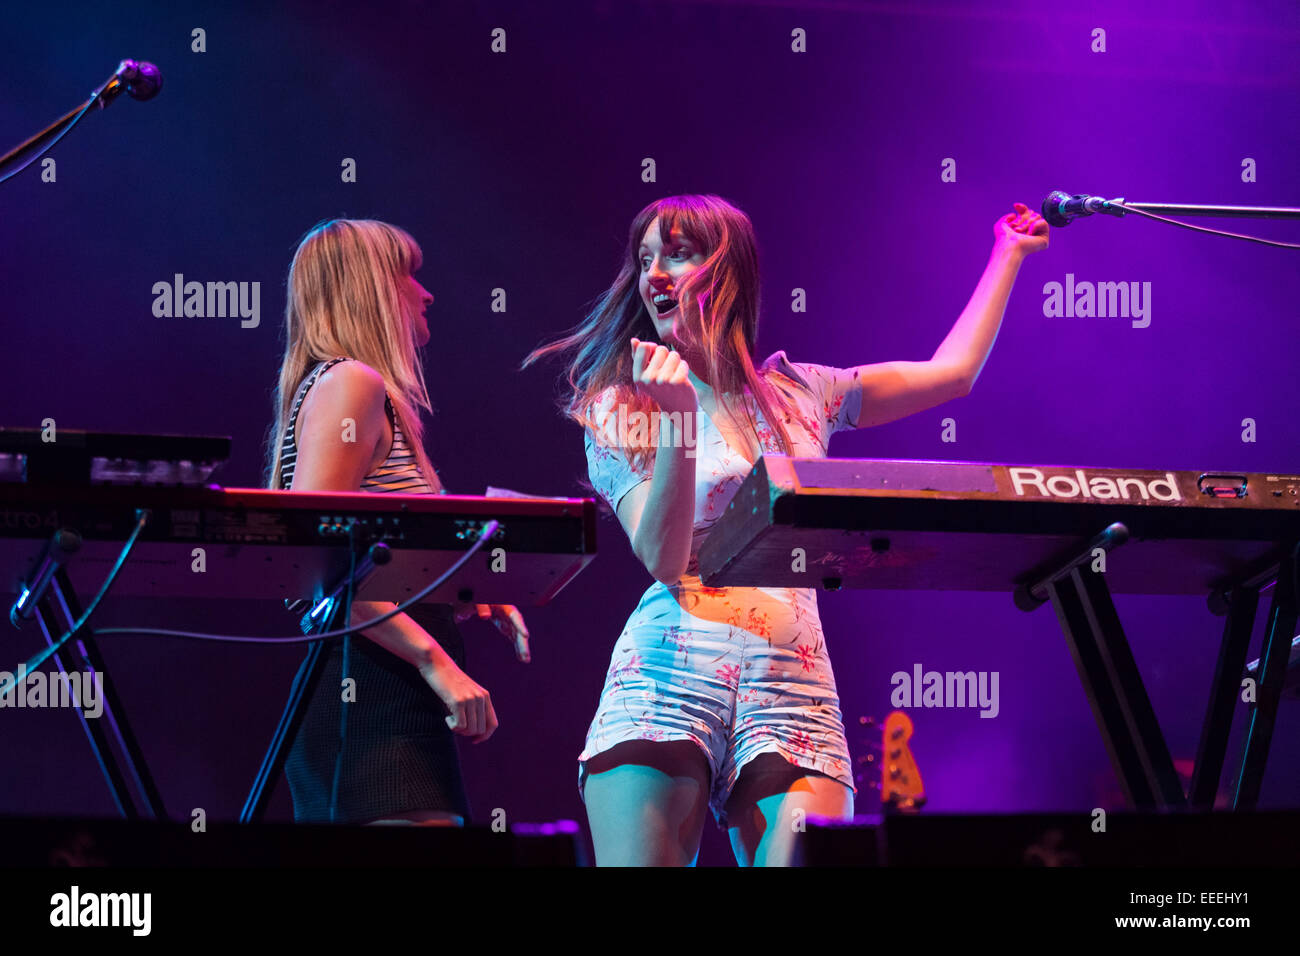 Alges Portugal Au Revoir Simone Performing Live On The 2nd Day Of Festival Nos Alive In Alges Friday Jul 11 14 Featuring Erika Forster Annie Hart Where Lisboa Portugal When 14 Jul 14